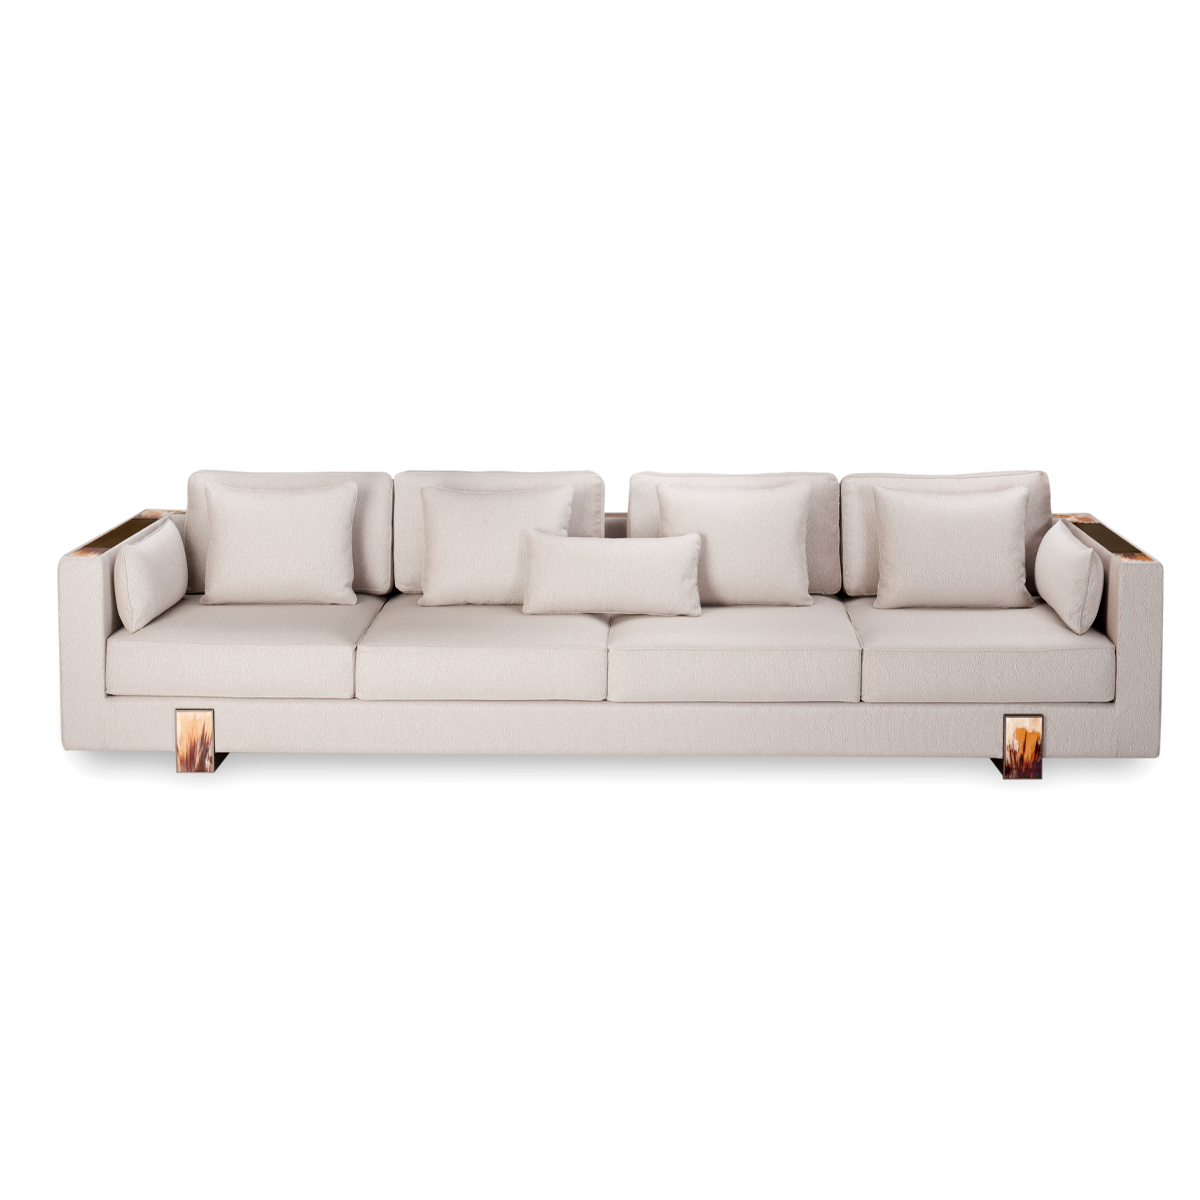 Arcahorn Adriano Soft Upholstered 2 3 4 Seater Sofa